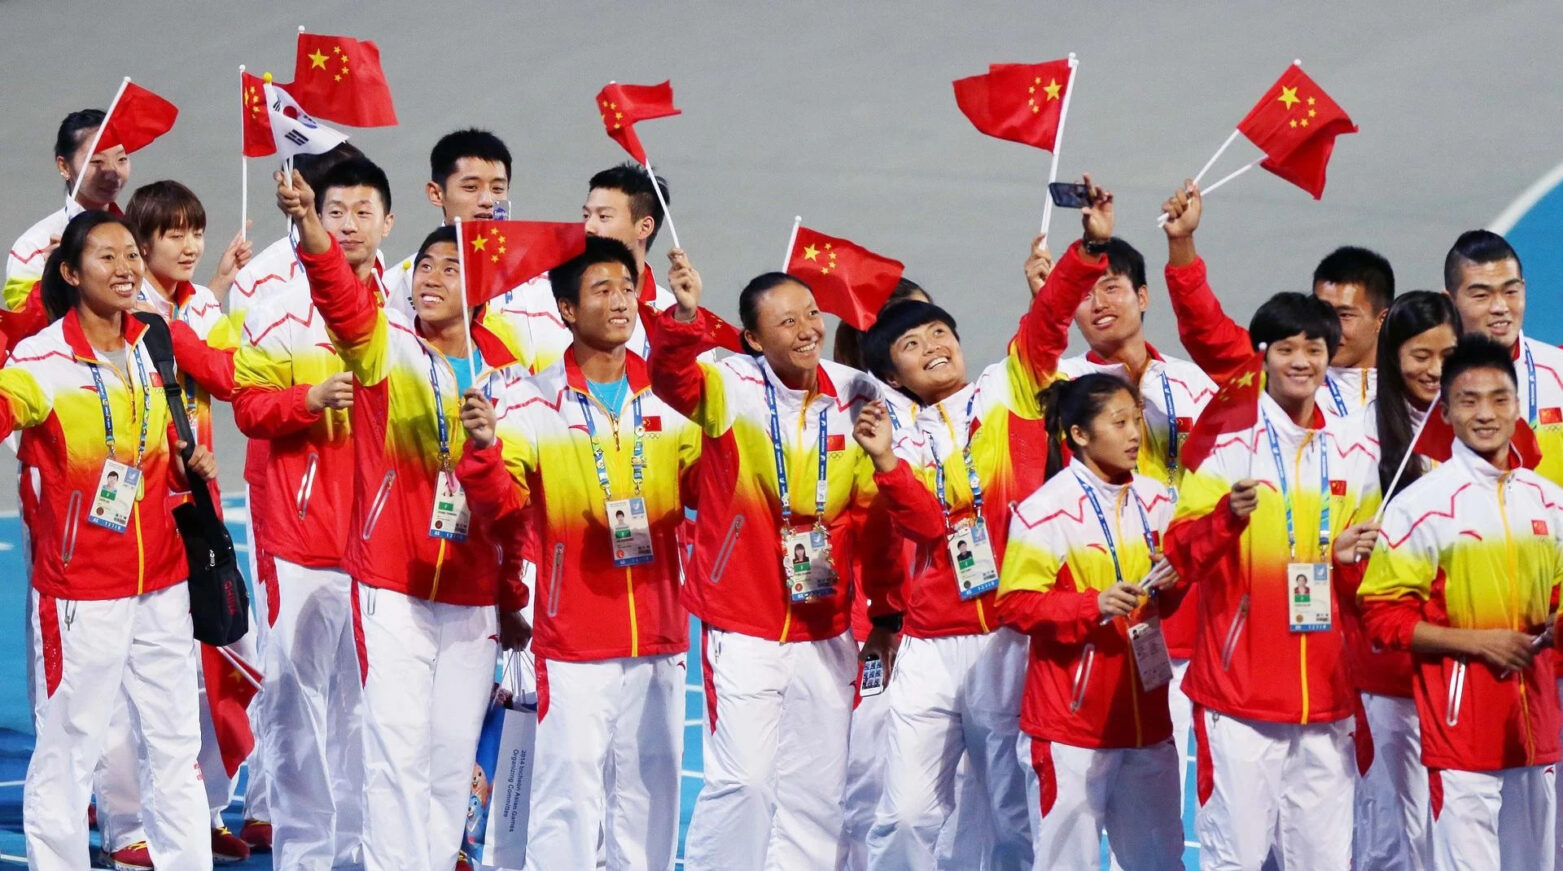 Chinese athletes in 2014 Asian Games